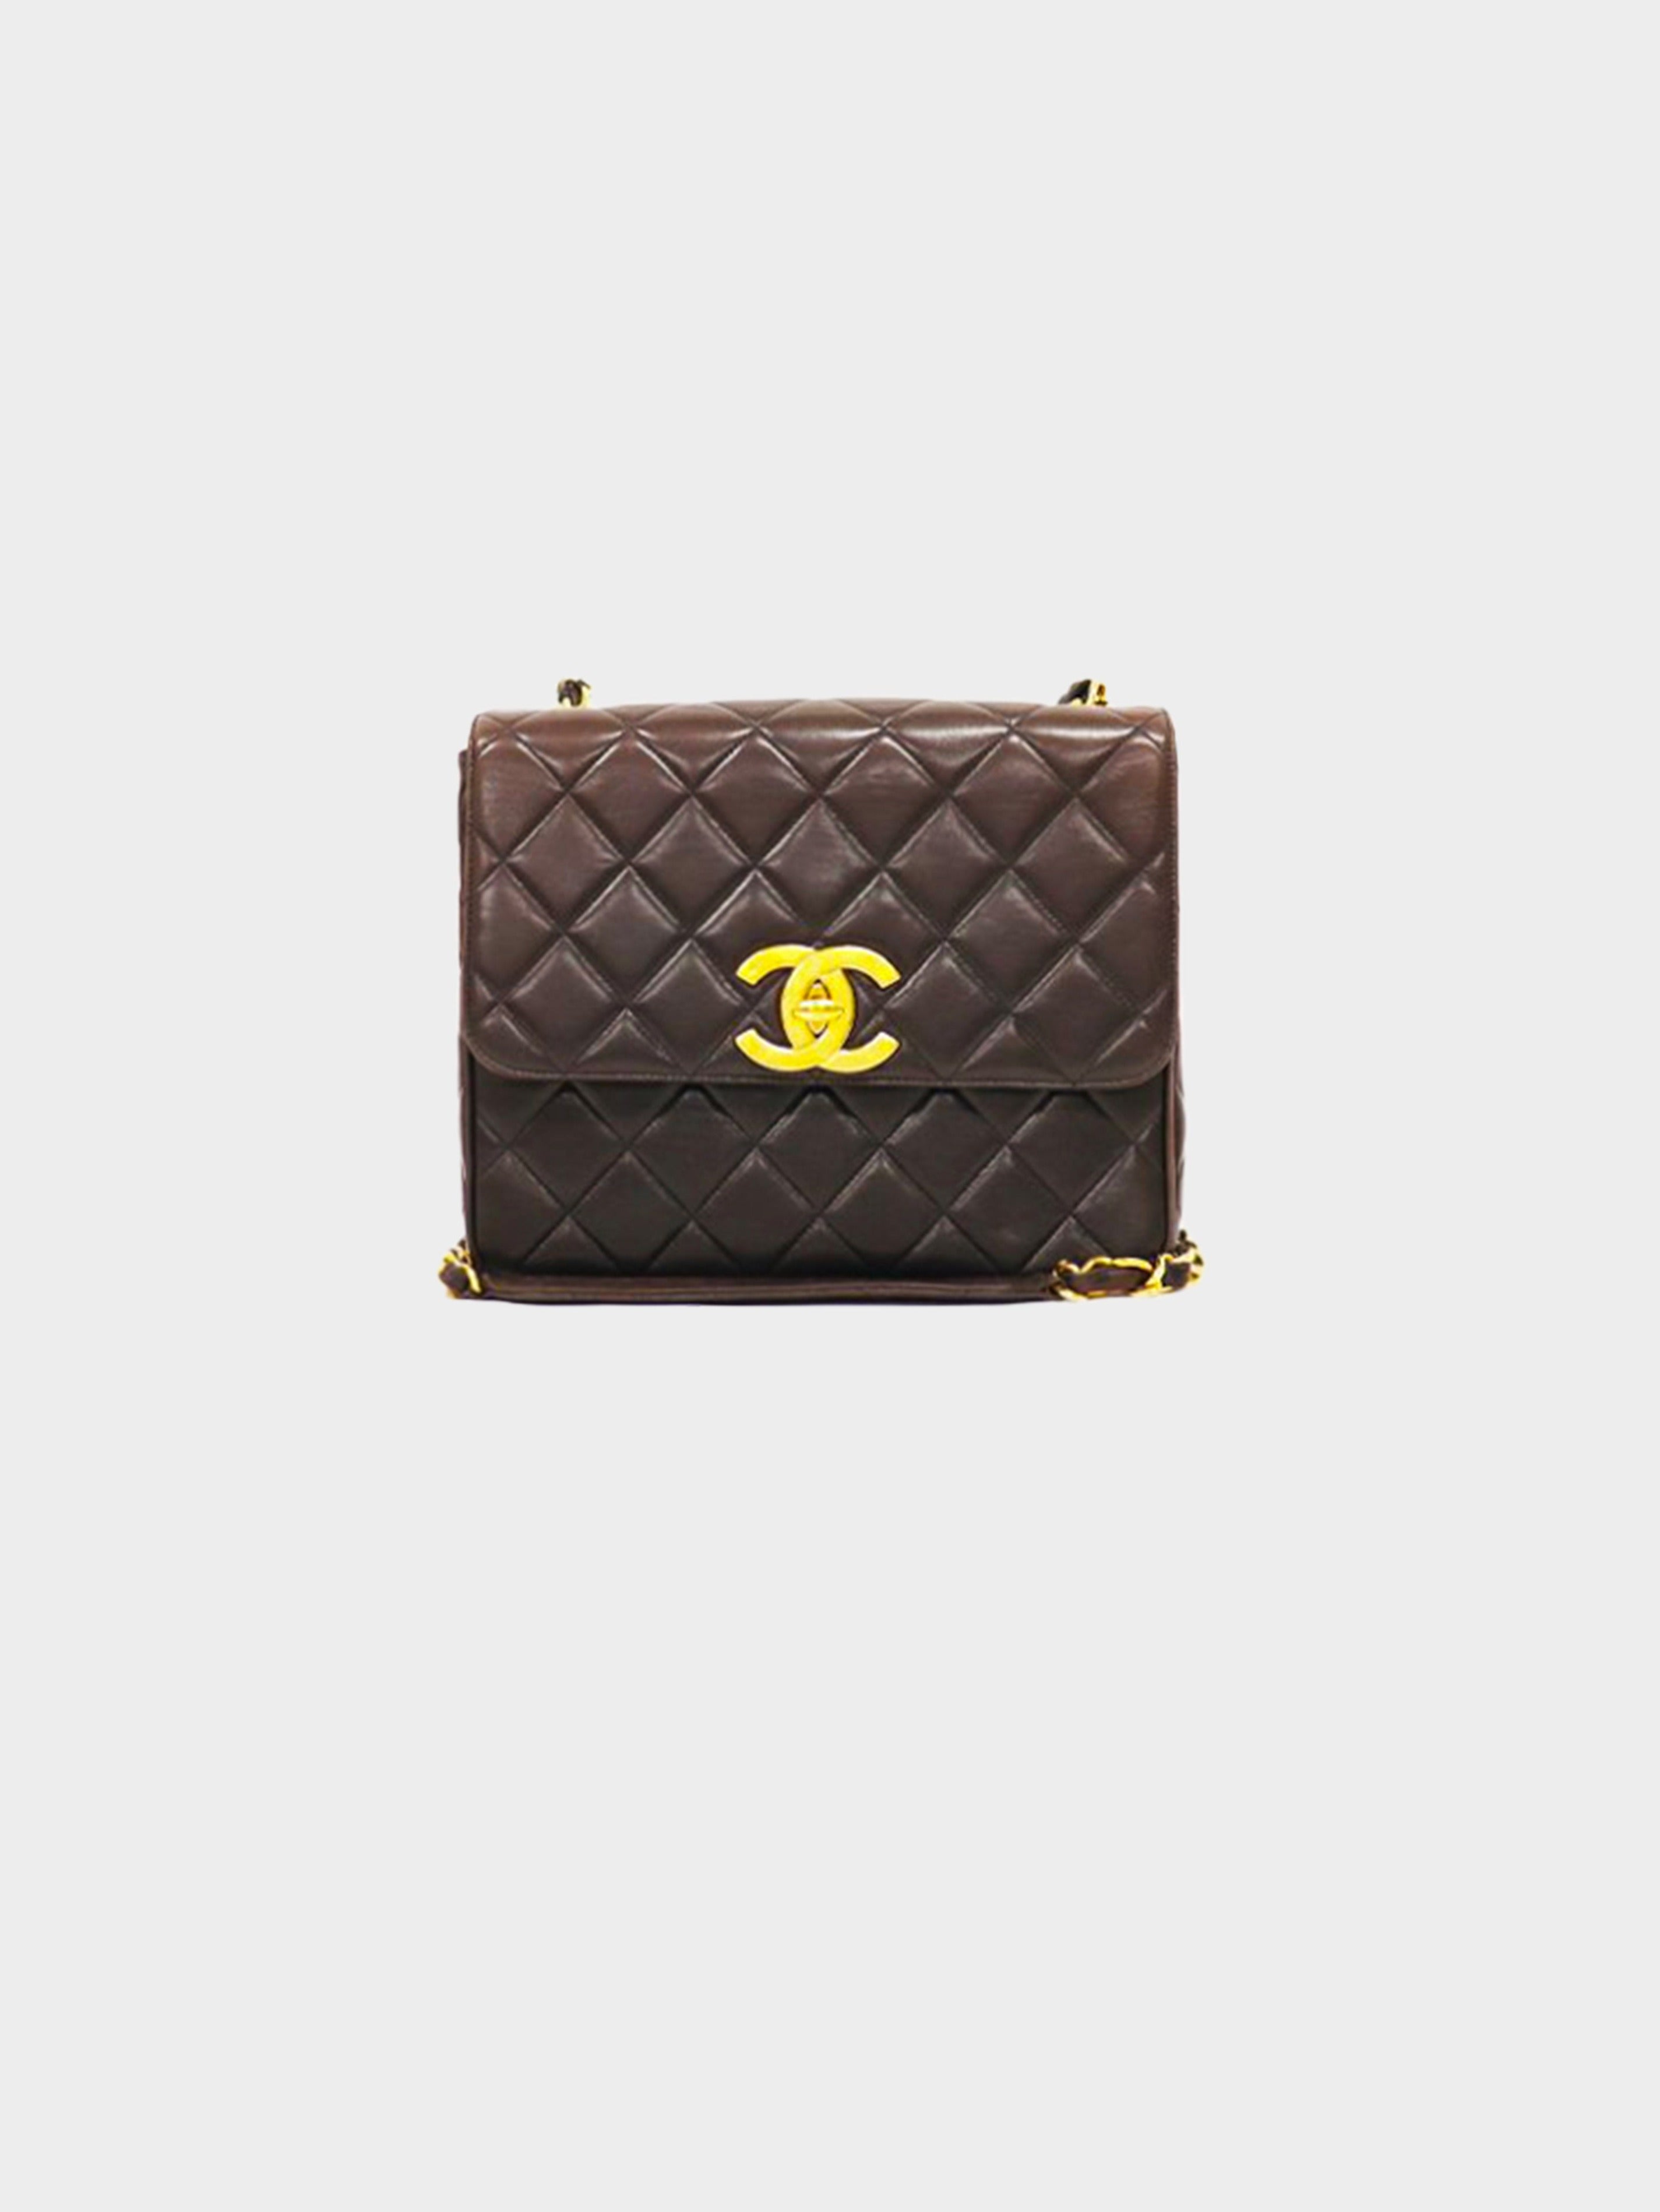 Chanel CHANEL Limited Matlass Turn Lock Chain Shoulder Bag Leather